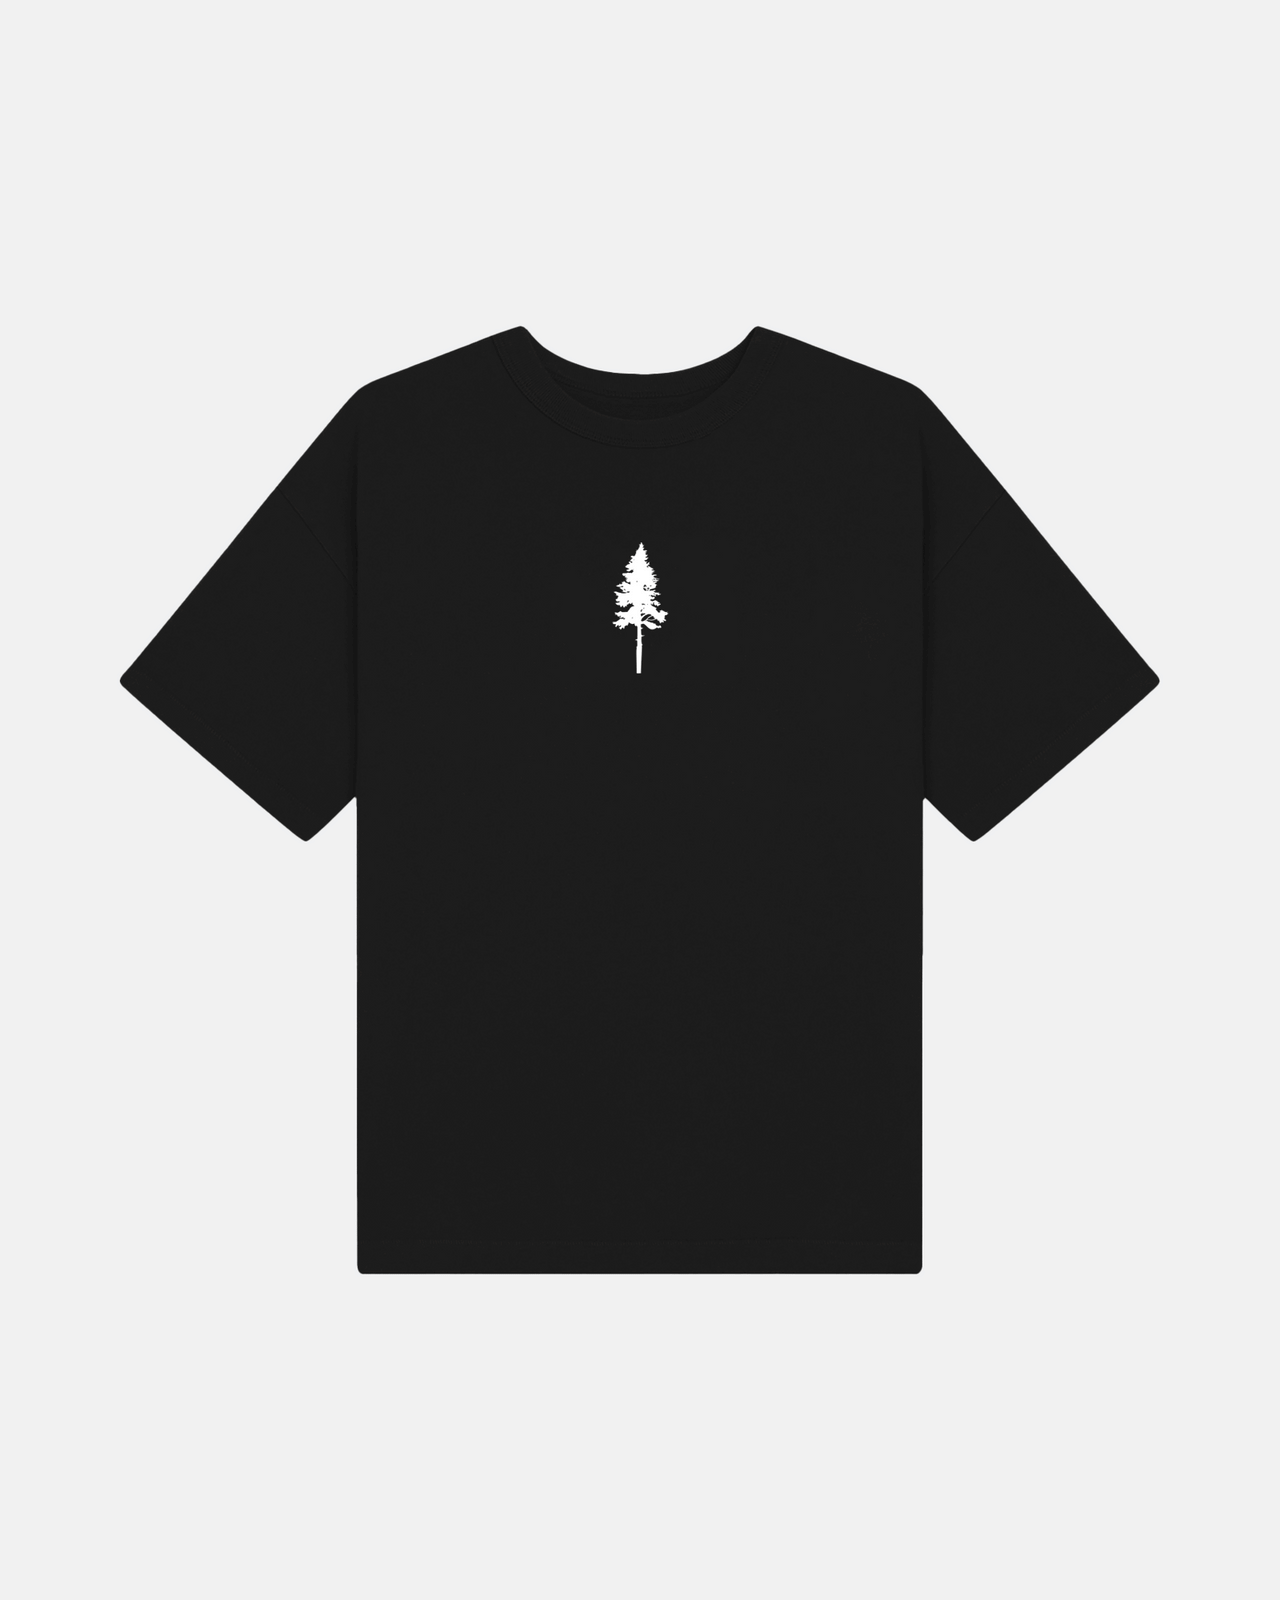 Forest Rave Cave Black Tee